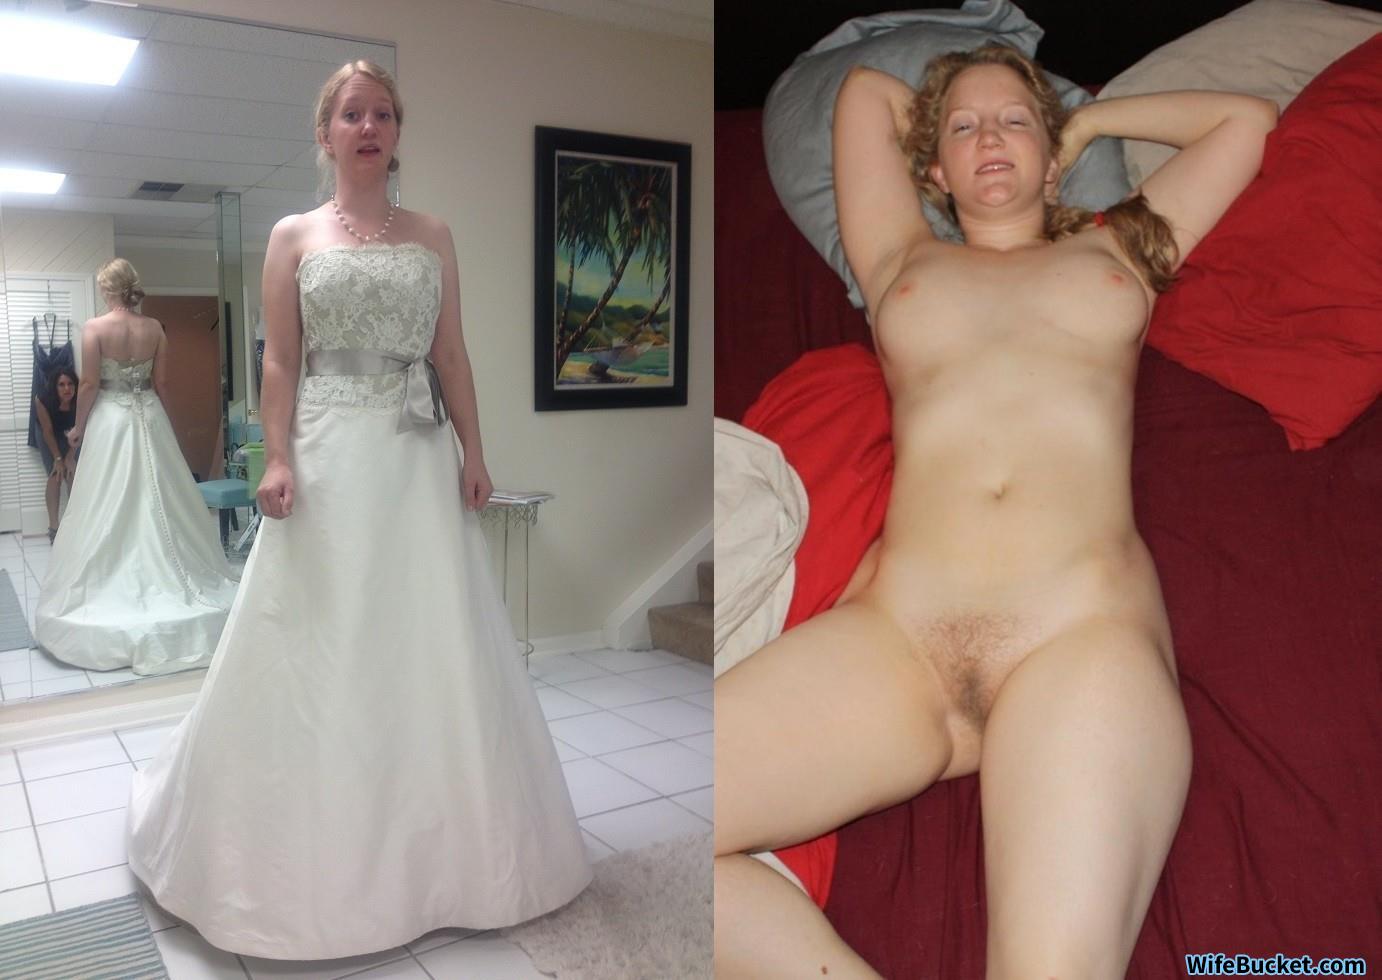 1382px x 980px - Before-after sex pics â€“ WifeBucket | Offical MILF Blog